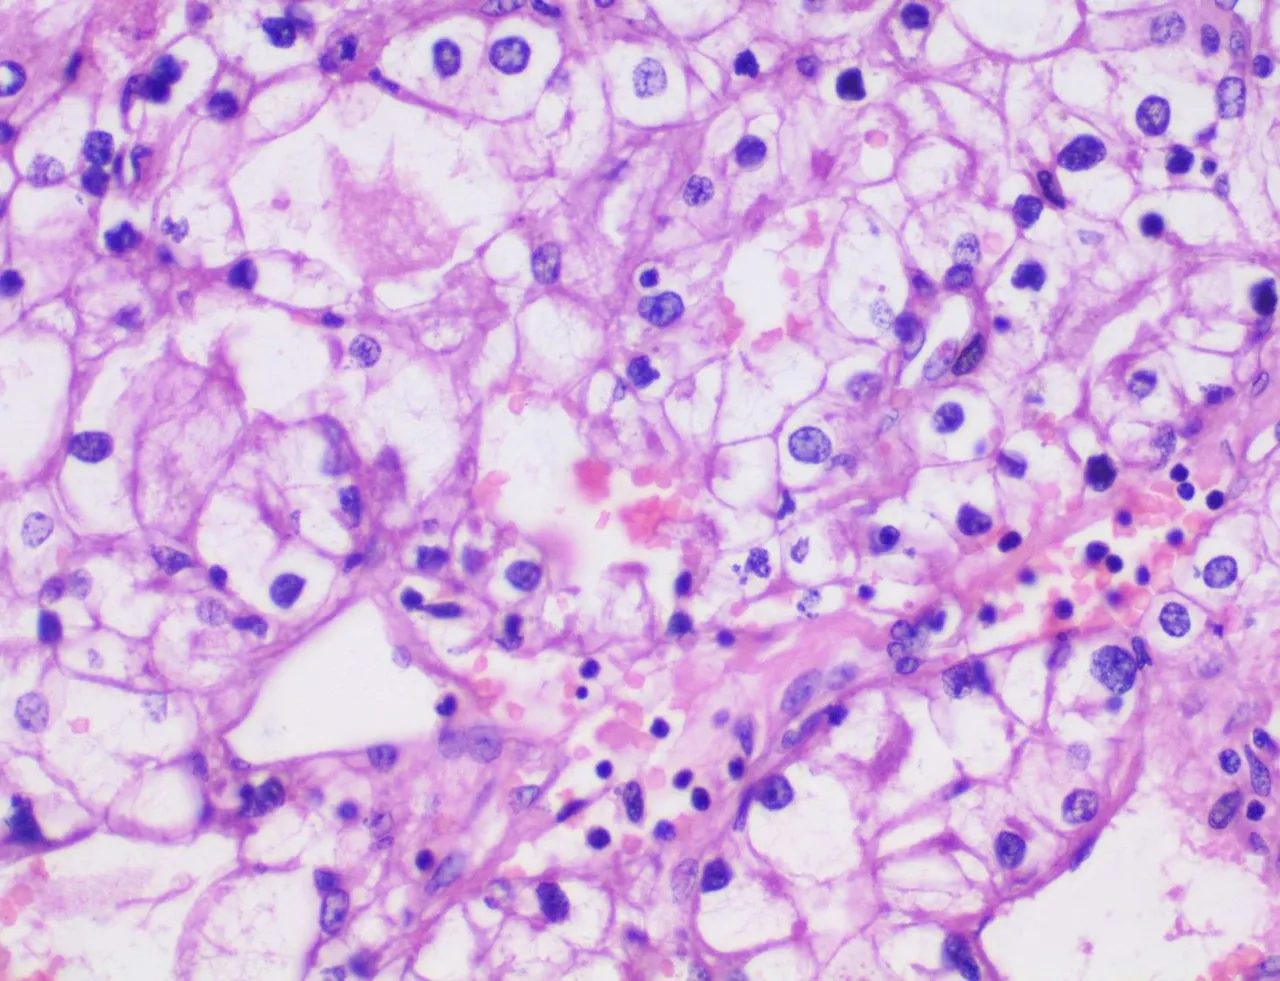 Renal Clear Cell Carcinoma HPF.jpg